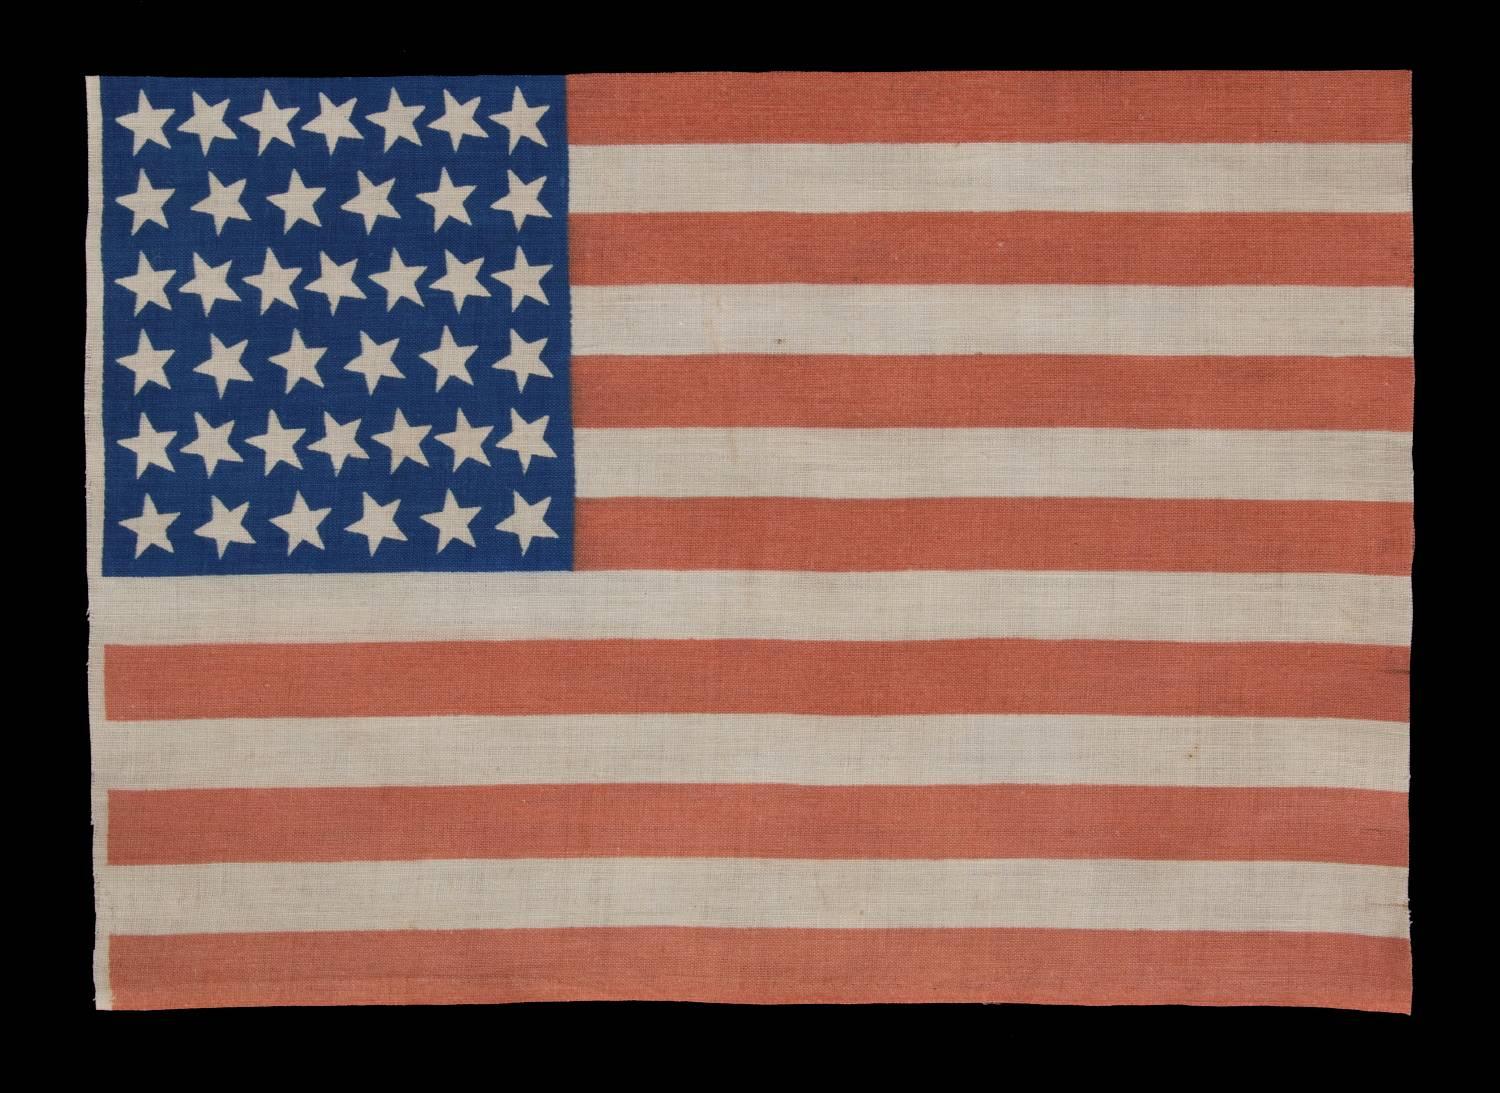 39 canted stars on an antique american flag dating to the 1876 centennial, never an official star count, reflects the anticipated arrival of the dakota territory:

39 star American parade flag, printed on plain weave cotton. Note how the stars,